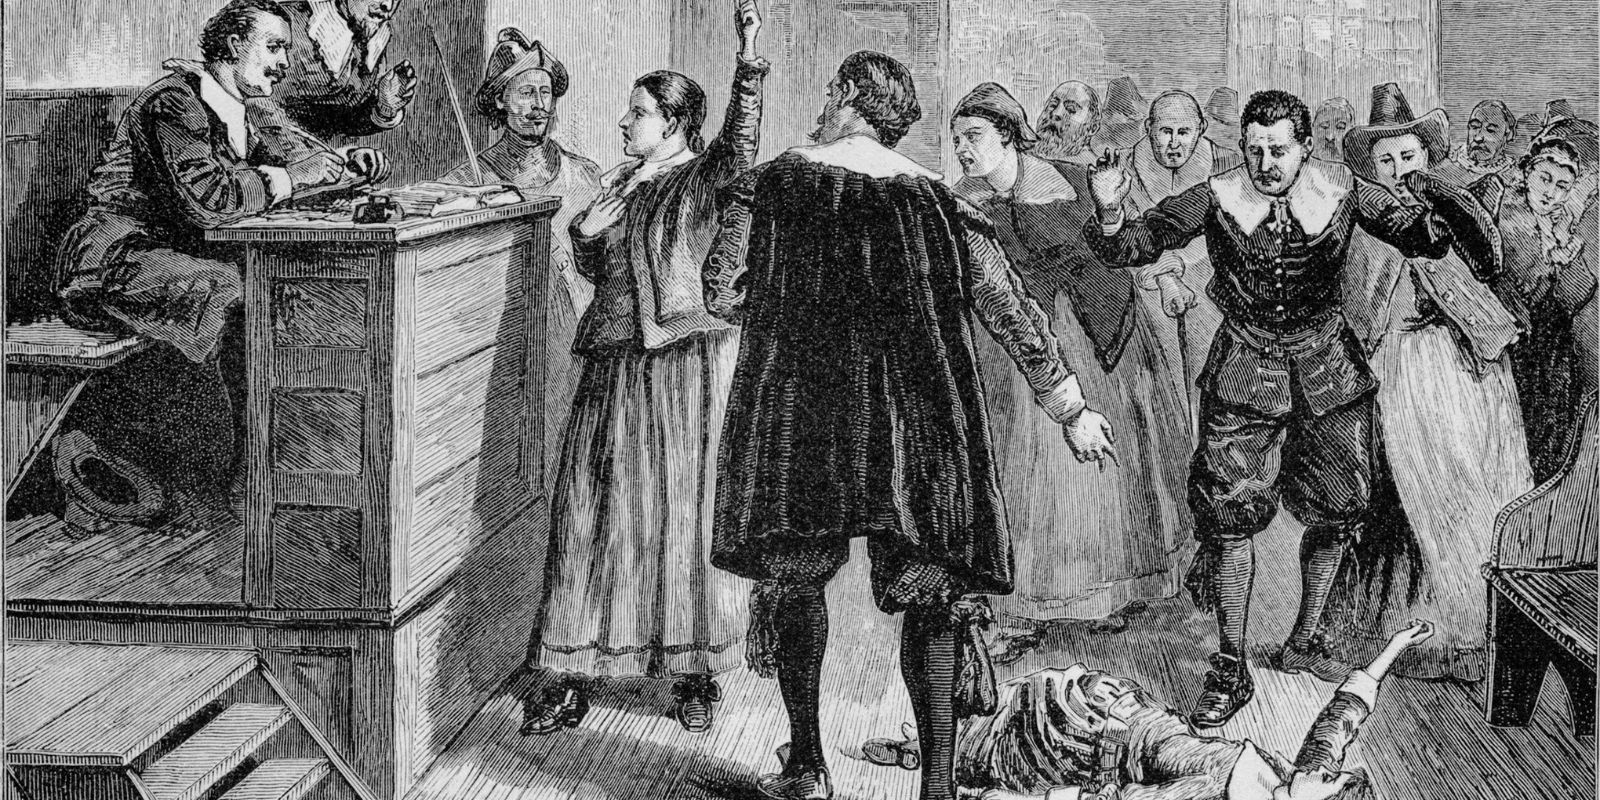 June 10th: The First “Salem Witch” Was Hanged